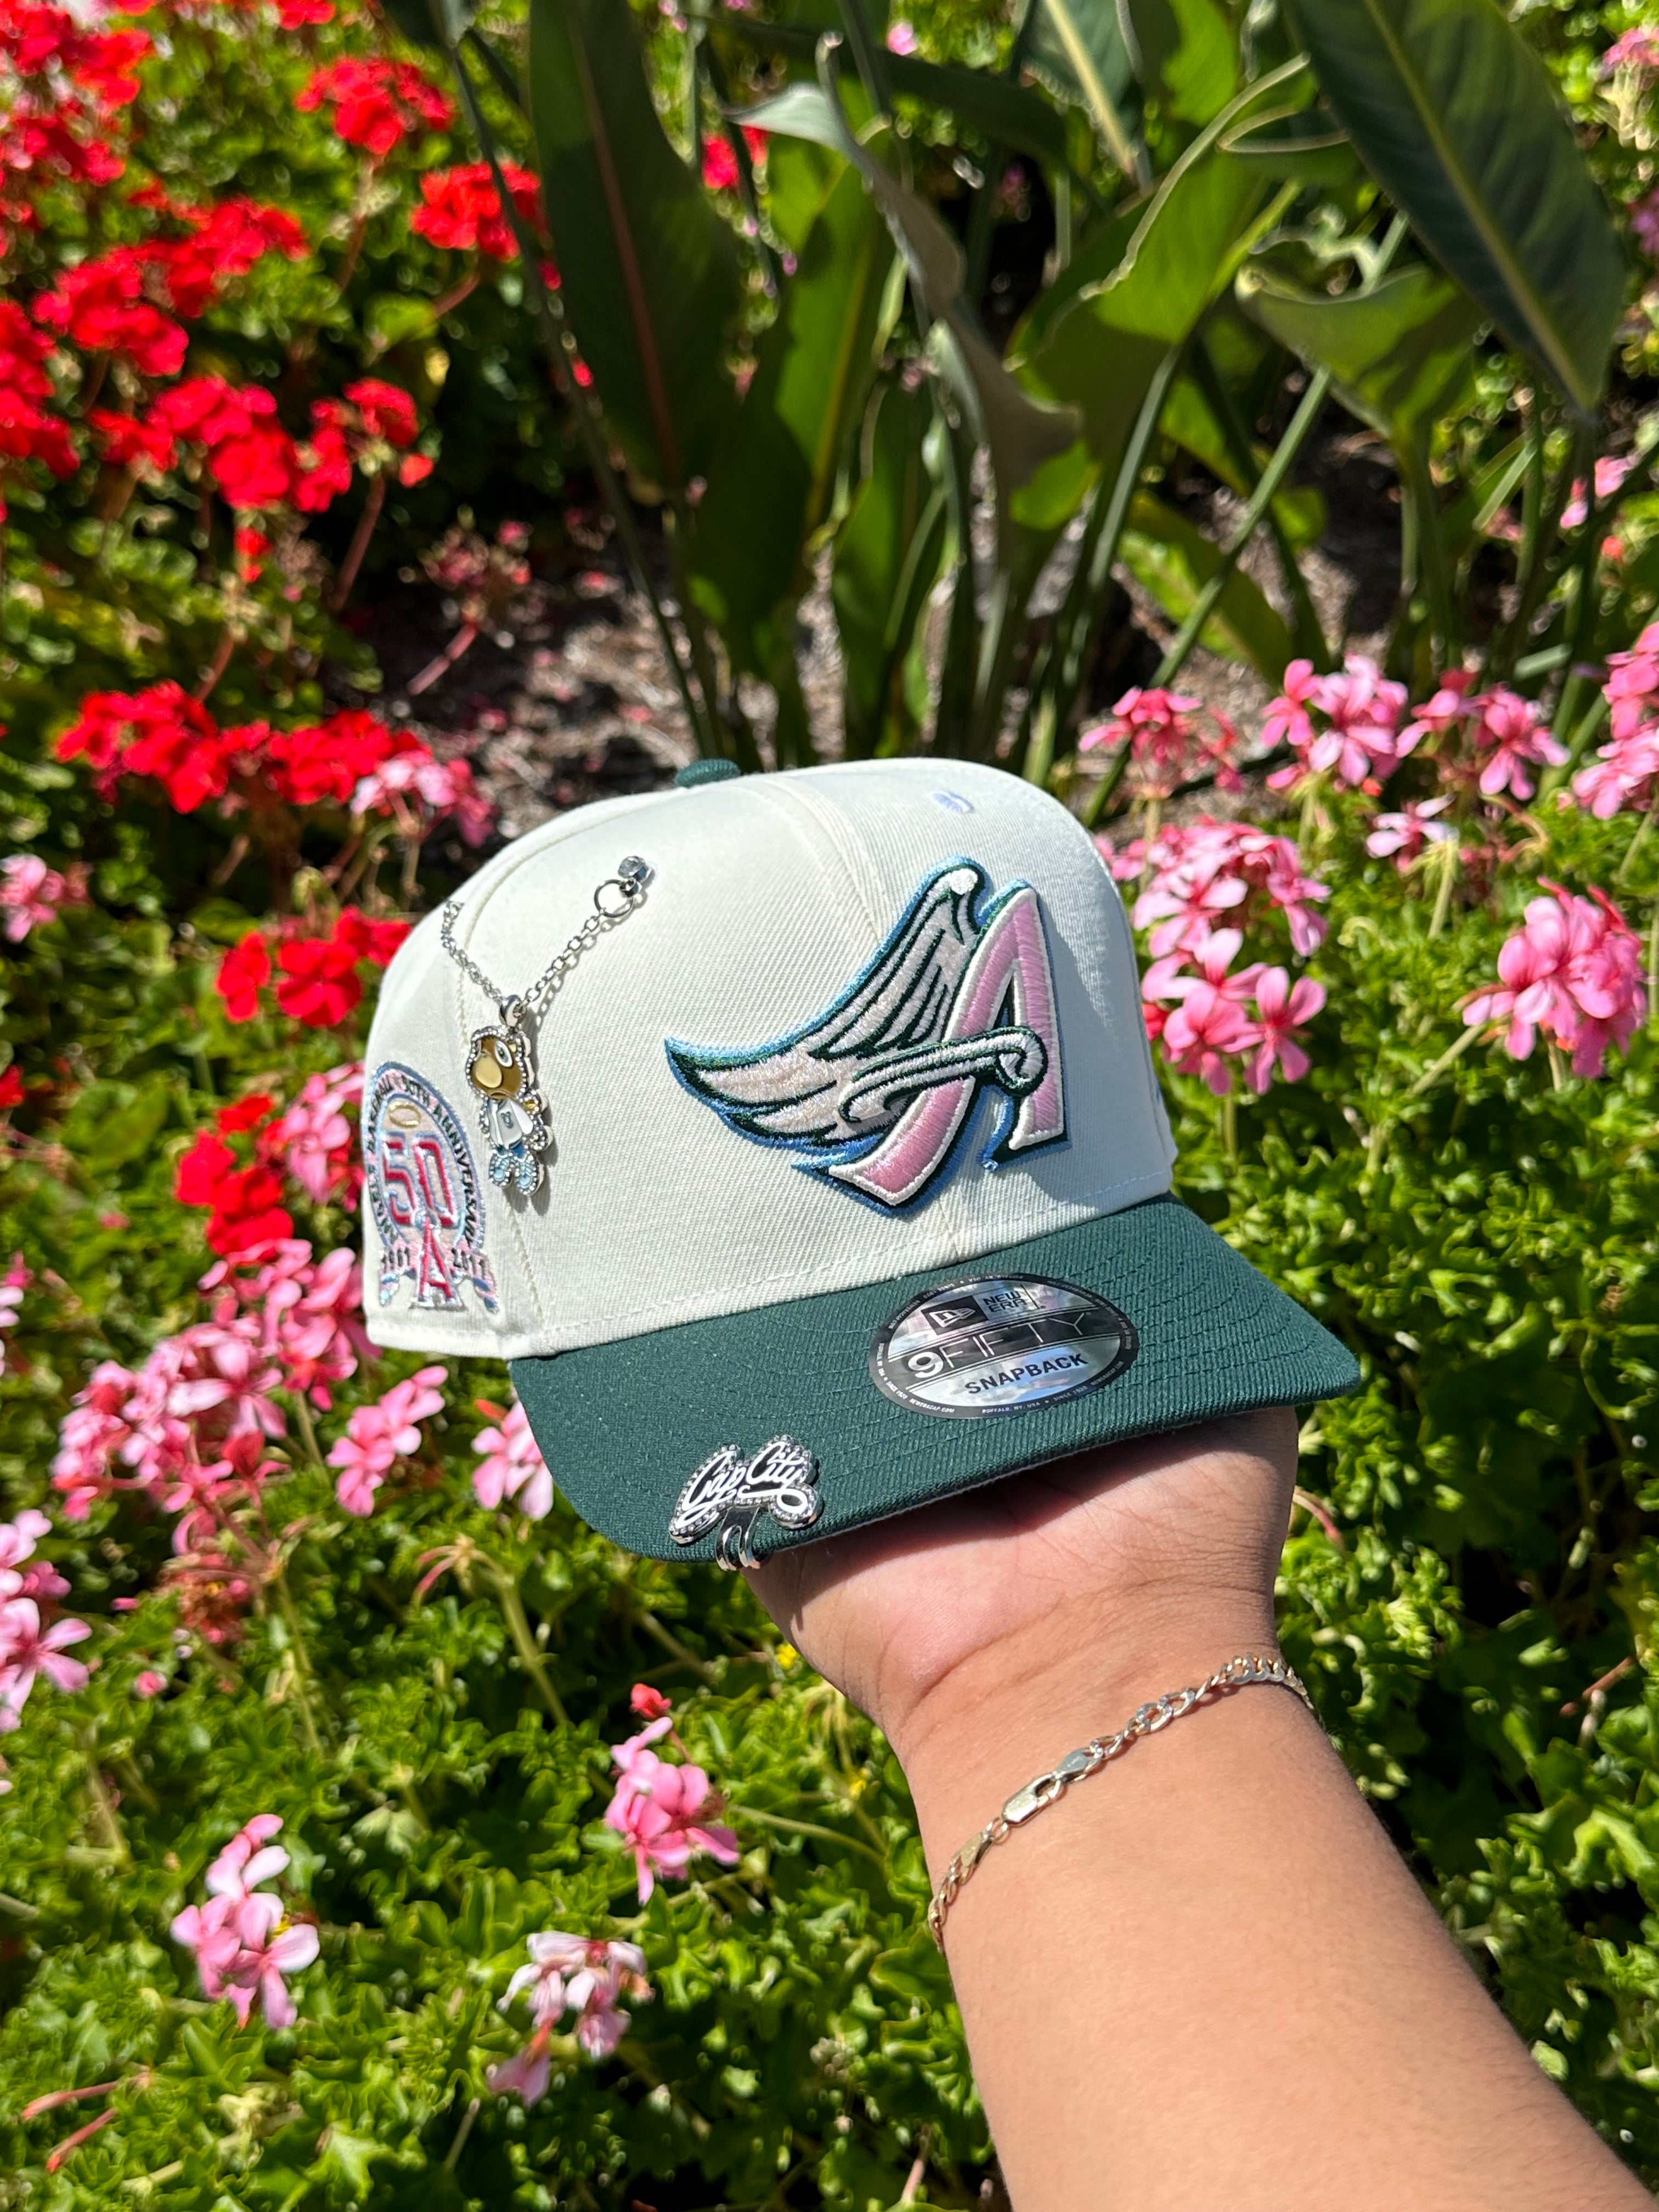 NEW ERA 9FIFTY CHROME WHITE/FOREST GREEN ANAHEIM ANGELS SNAPBACK W/ 50TH ANNIVERSARY SIDE PATCH